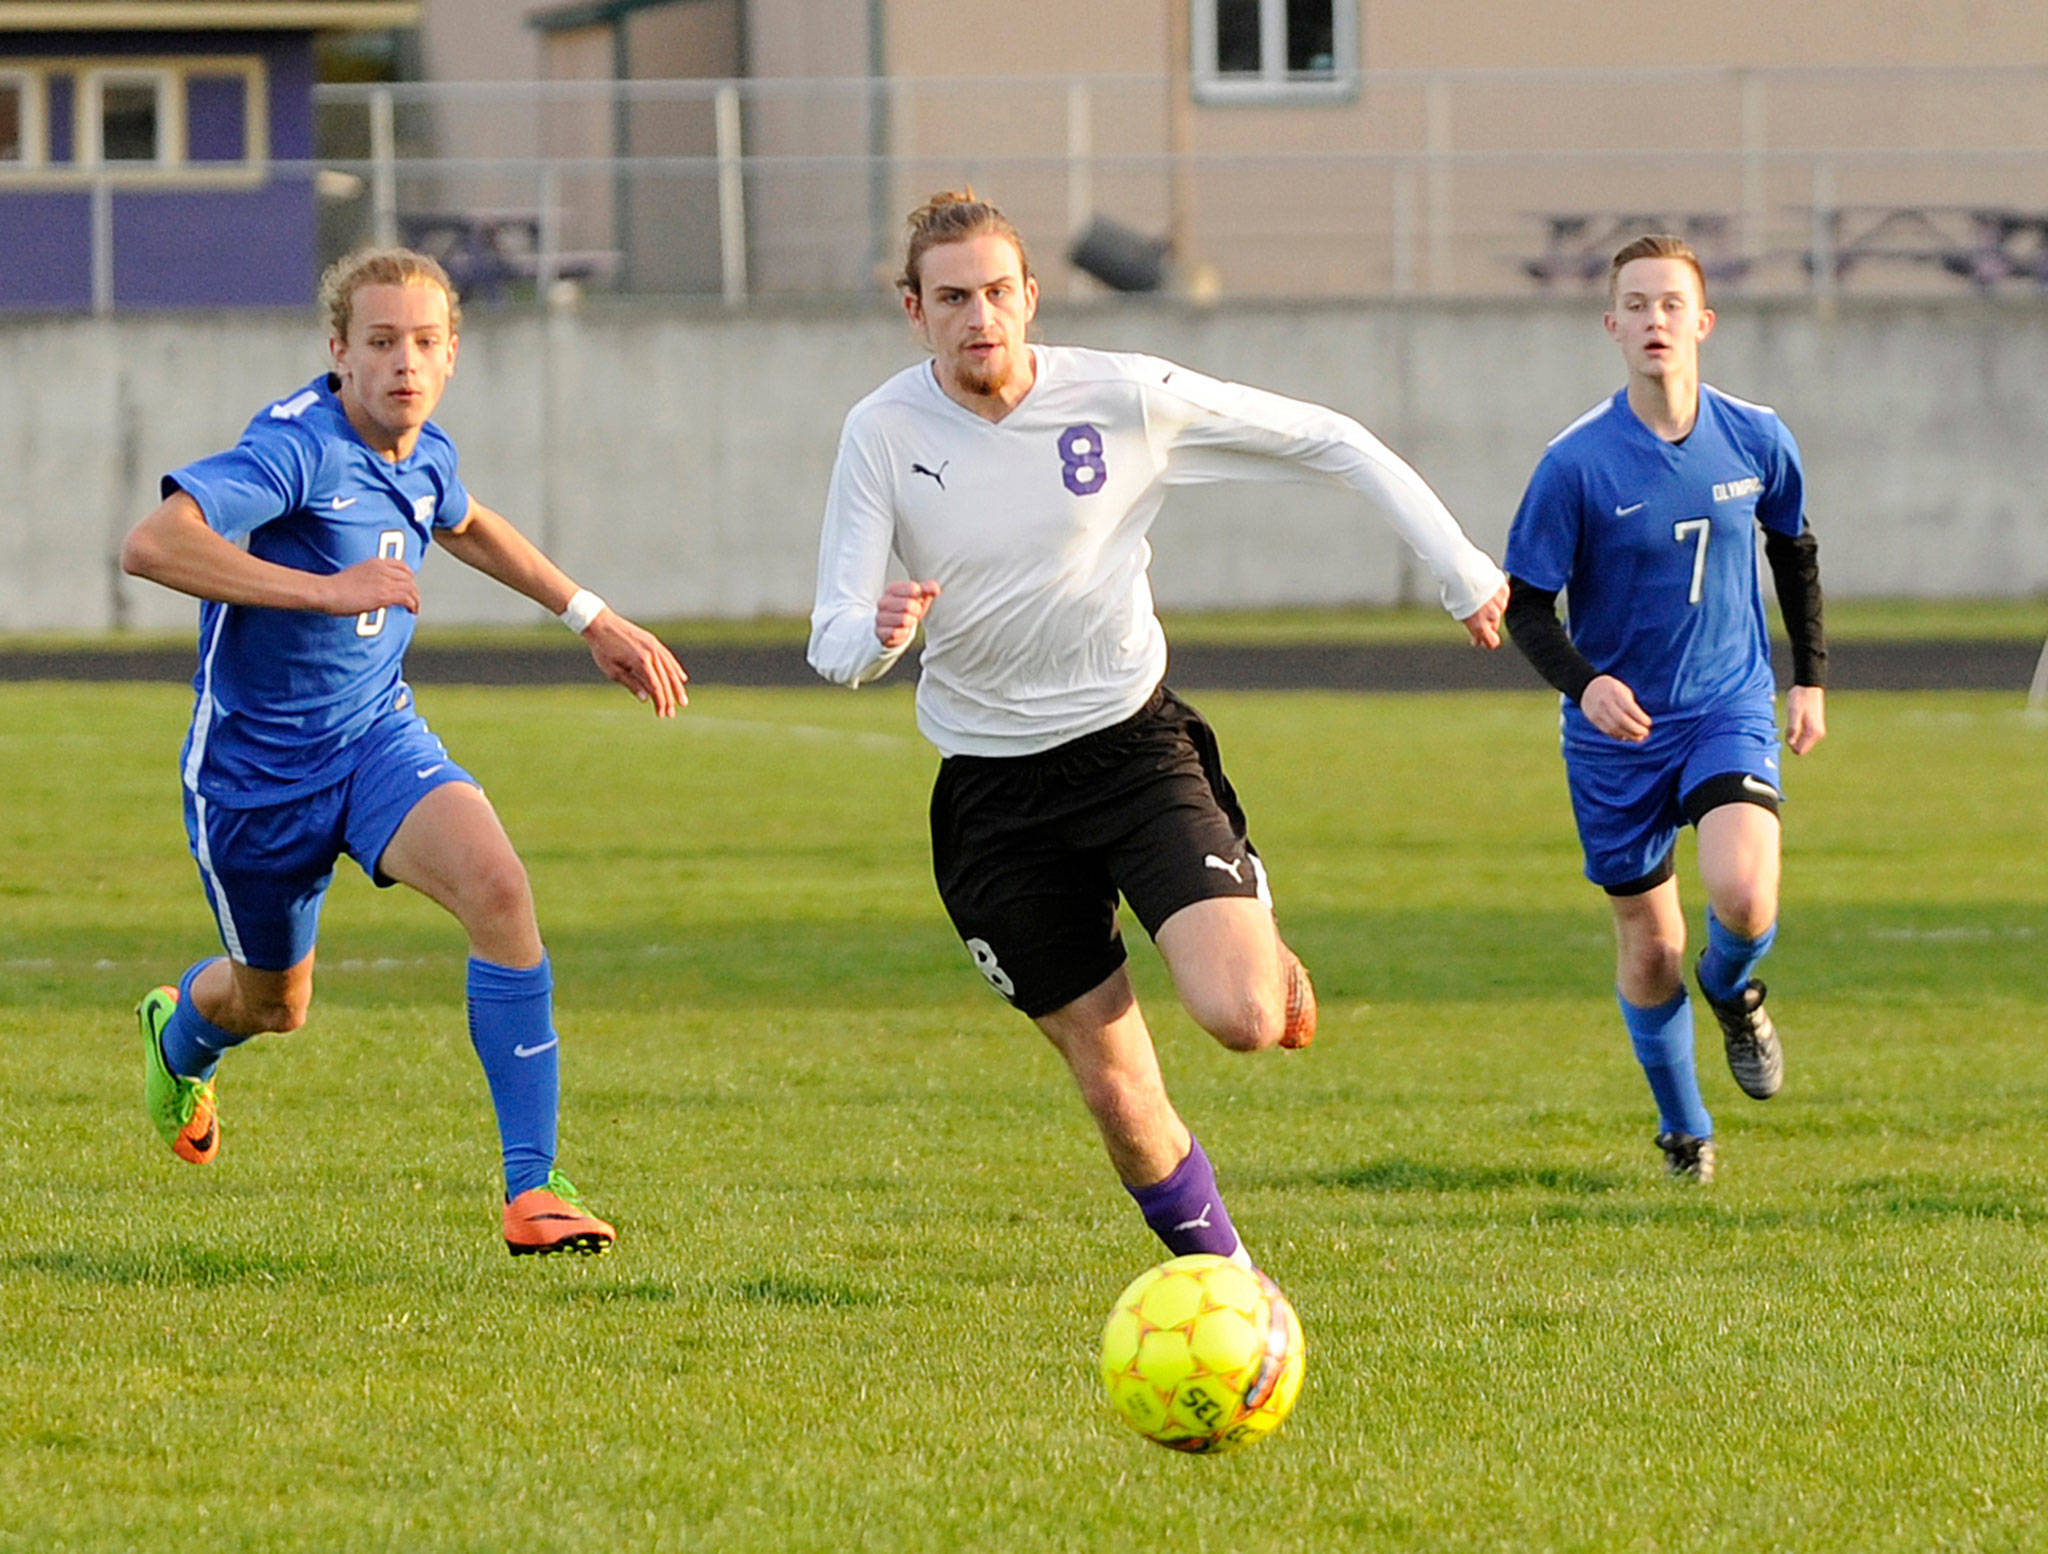 Michael Dashiell/Olympic Peninsula News Group Sequim’s Liam Harris, chasing down the ball earlier this season against Olympic, tied Kai Antrim’s school record for career goals (40) with a score Tuesday against North Mason.